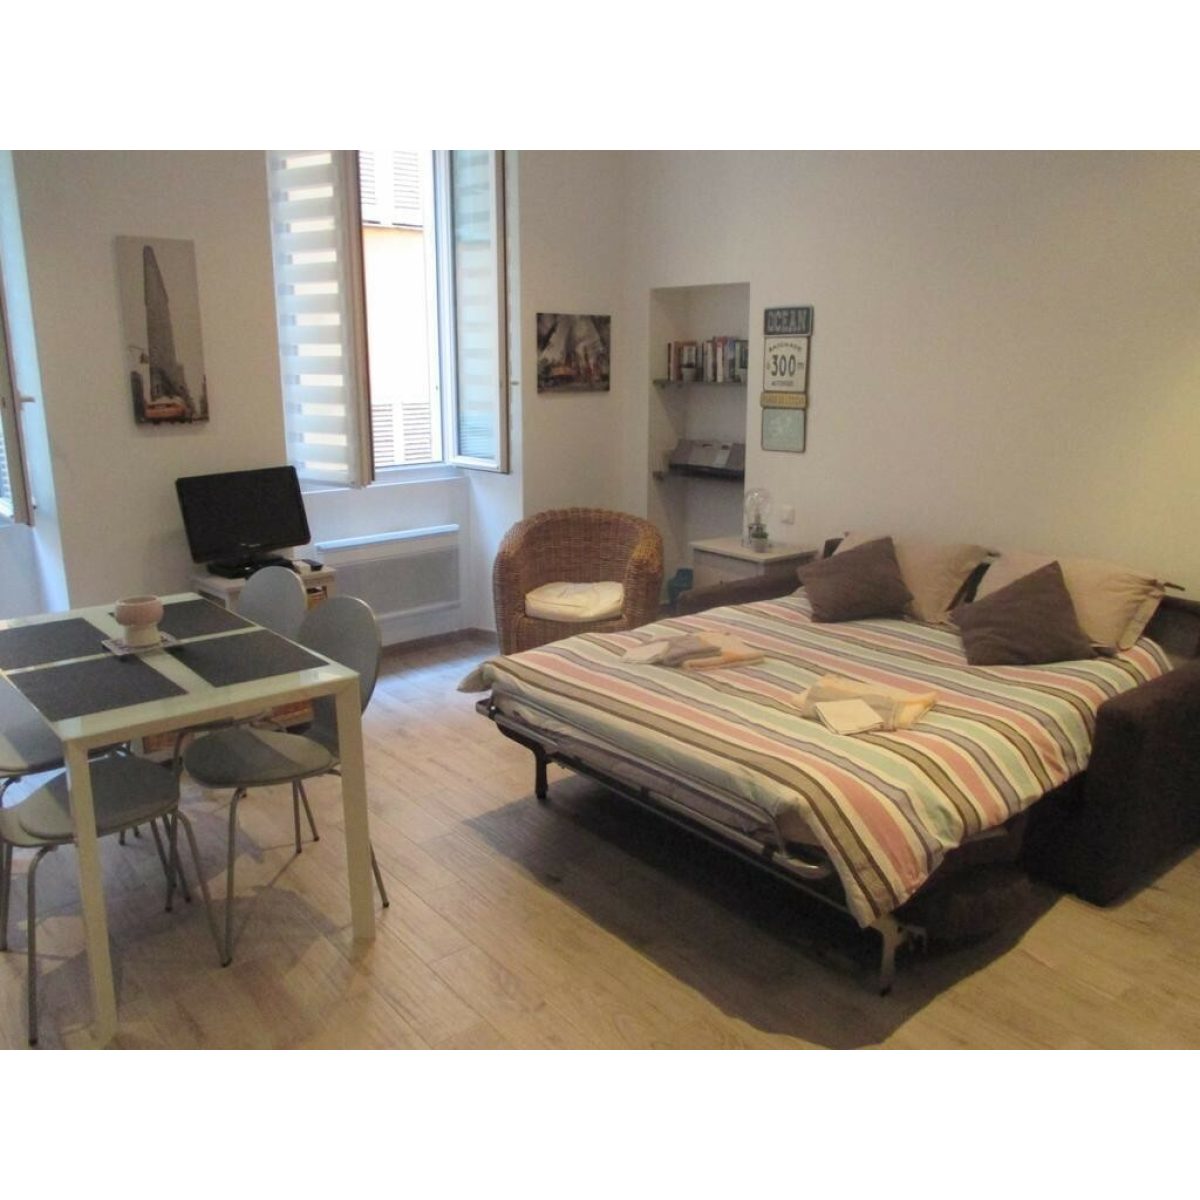 Dazzling 2 bedroom apartment in Zagreb for rent (Students only) | Zagreb apartment for rent 2